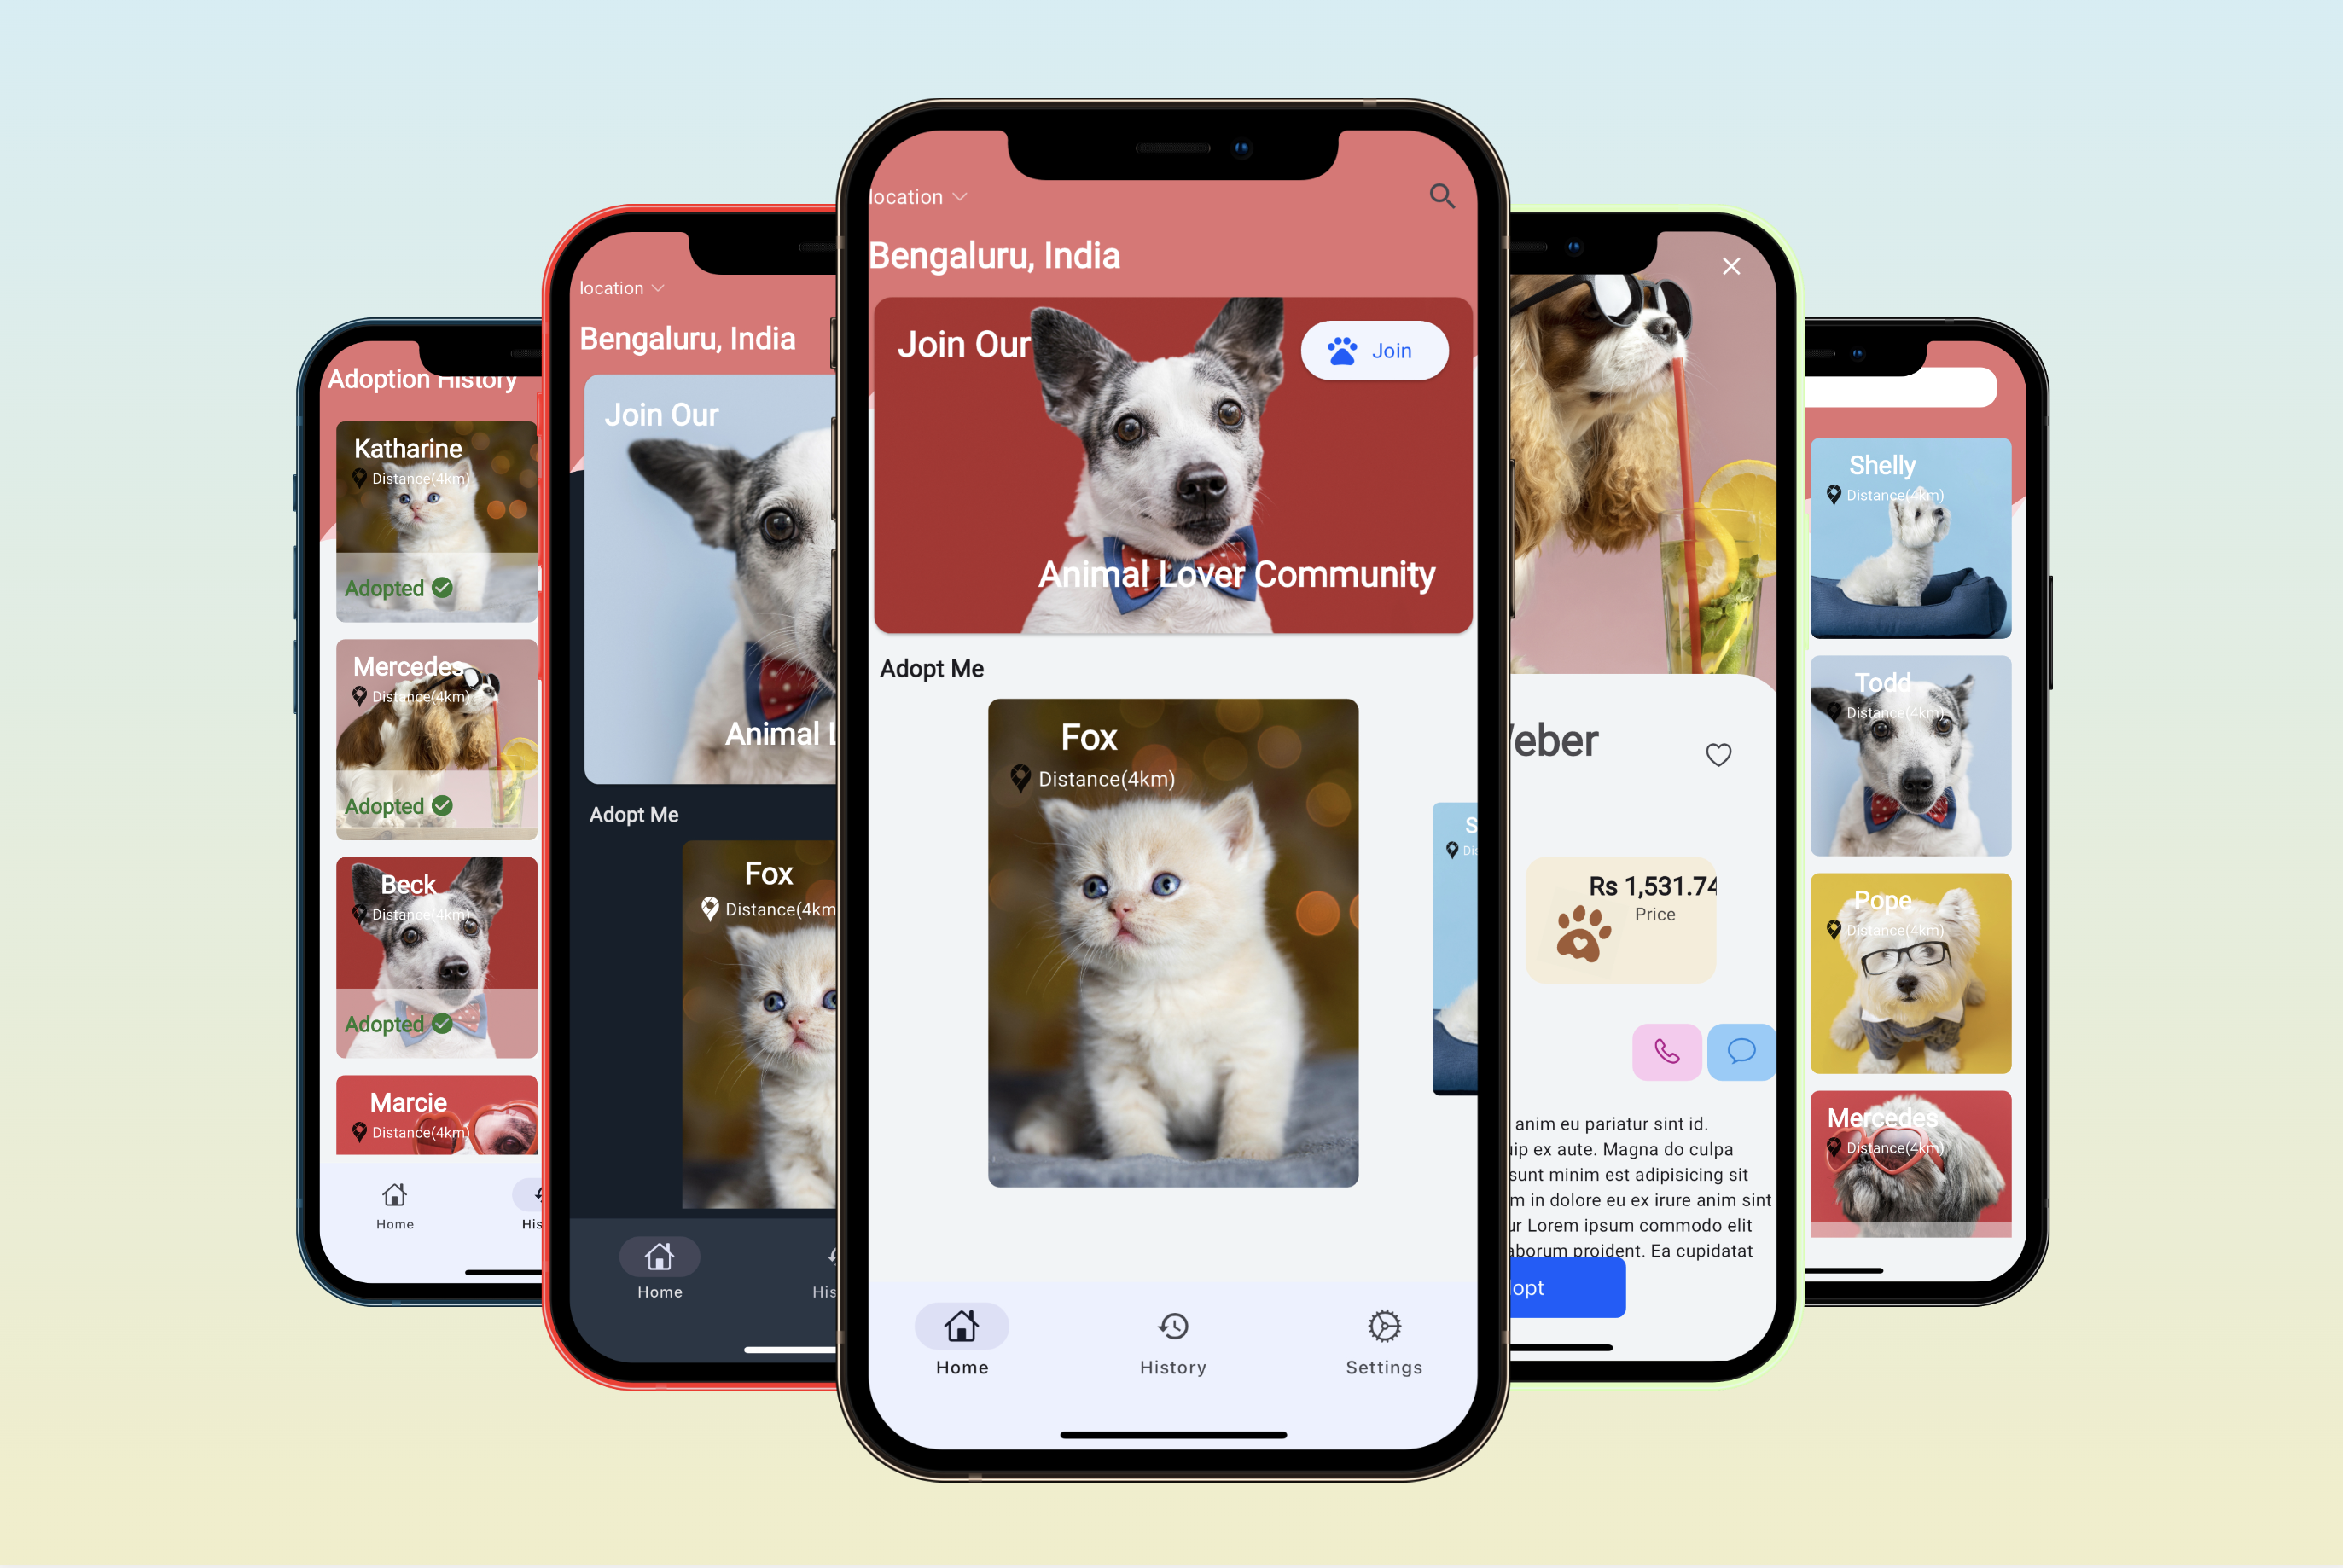 A pet adoption app built with Flutter that allows users to browse and adopt pets